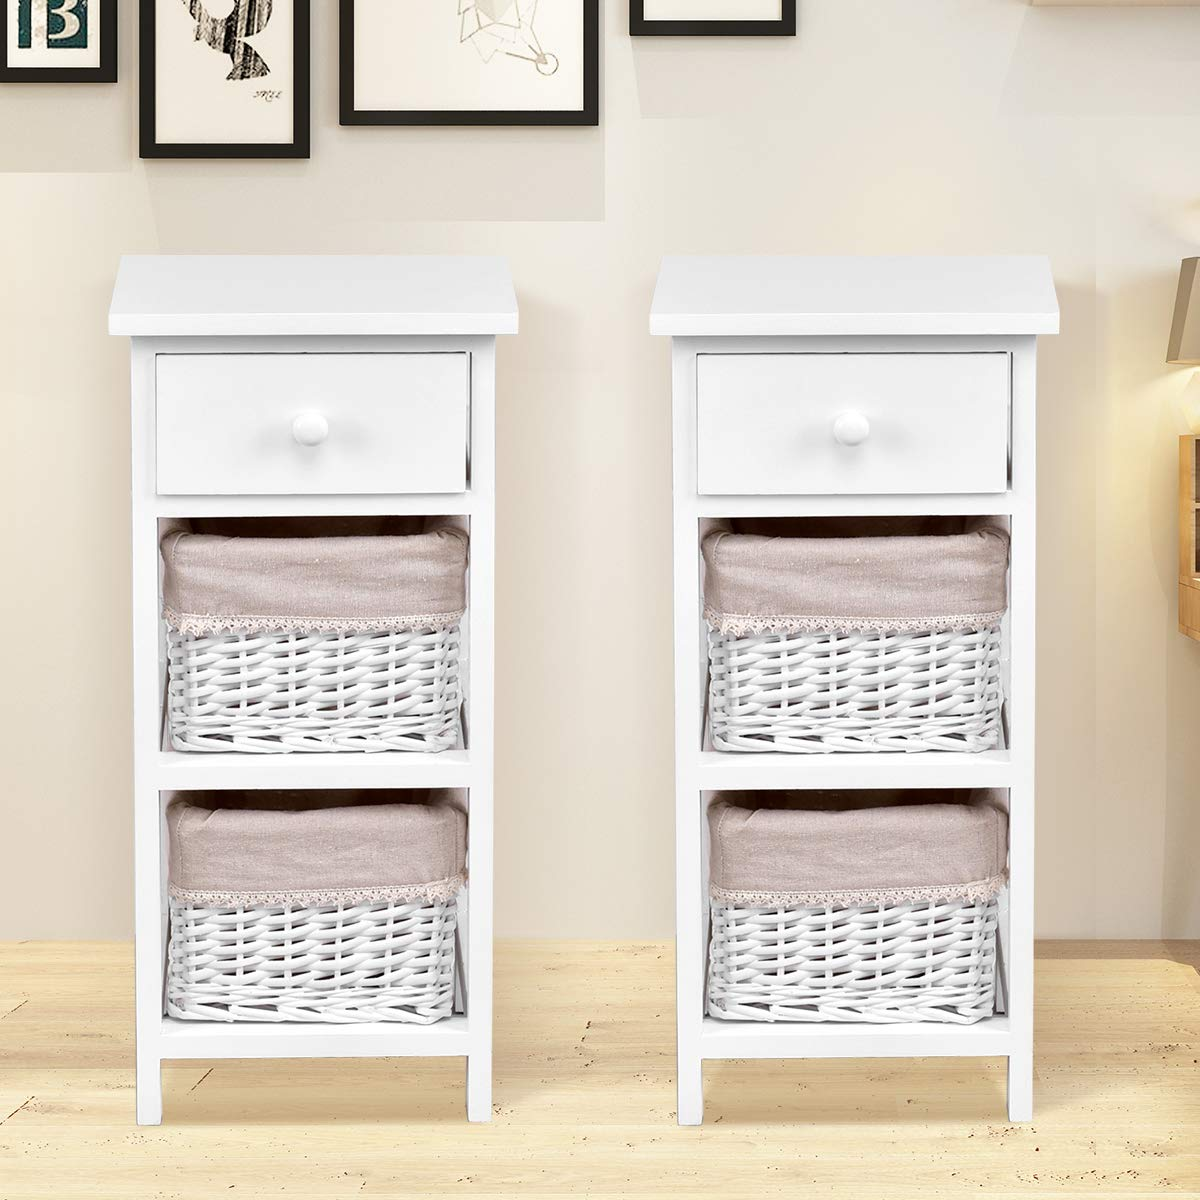 Giantex Wooden Nightstand 3-Tier Modern Bedside Table with 1 Drawer and 2 Storage Baskets